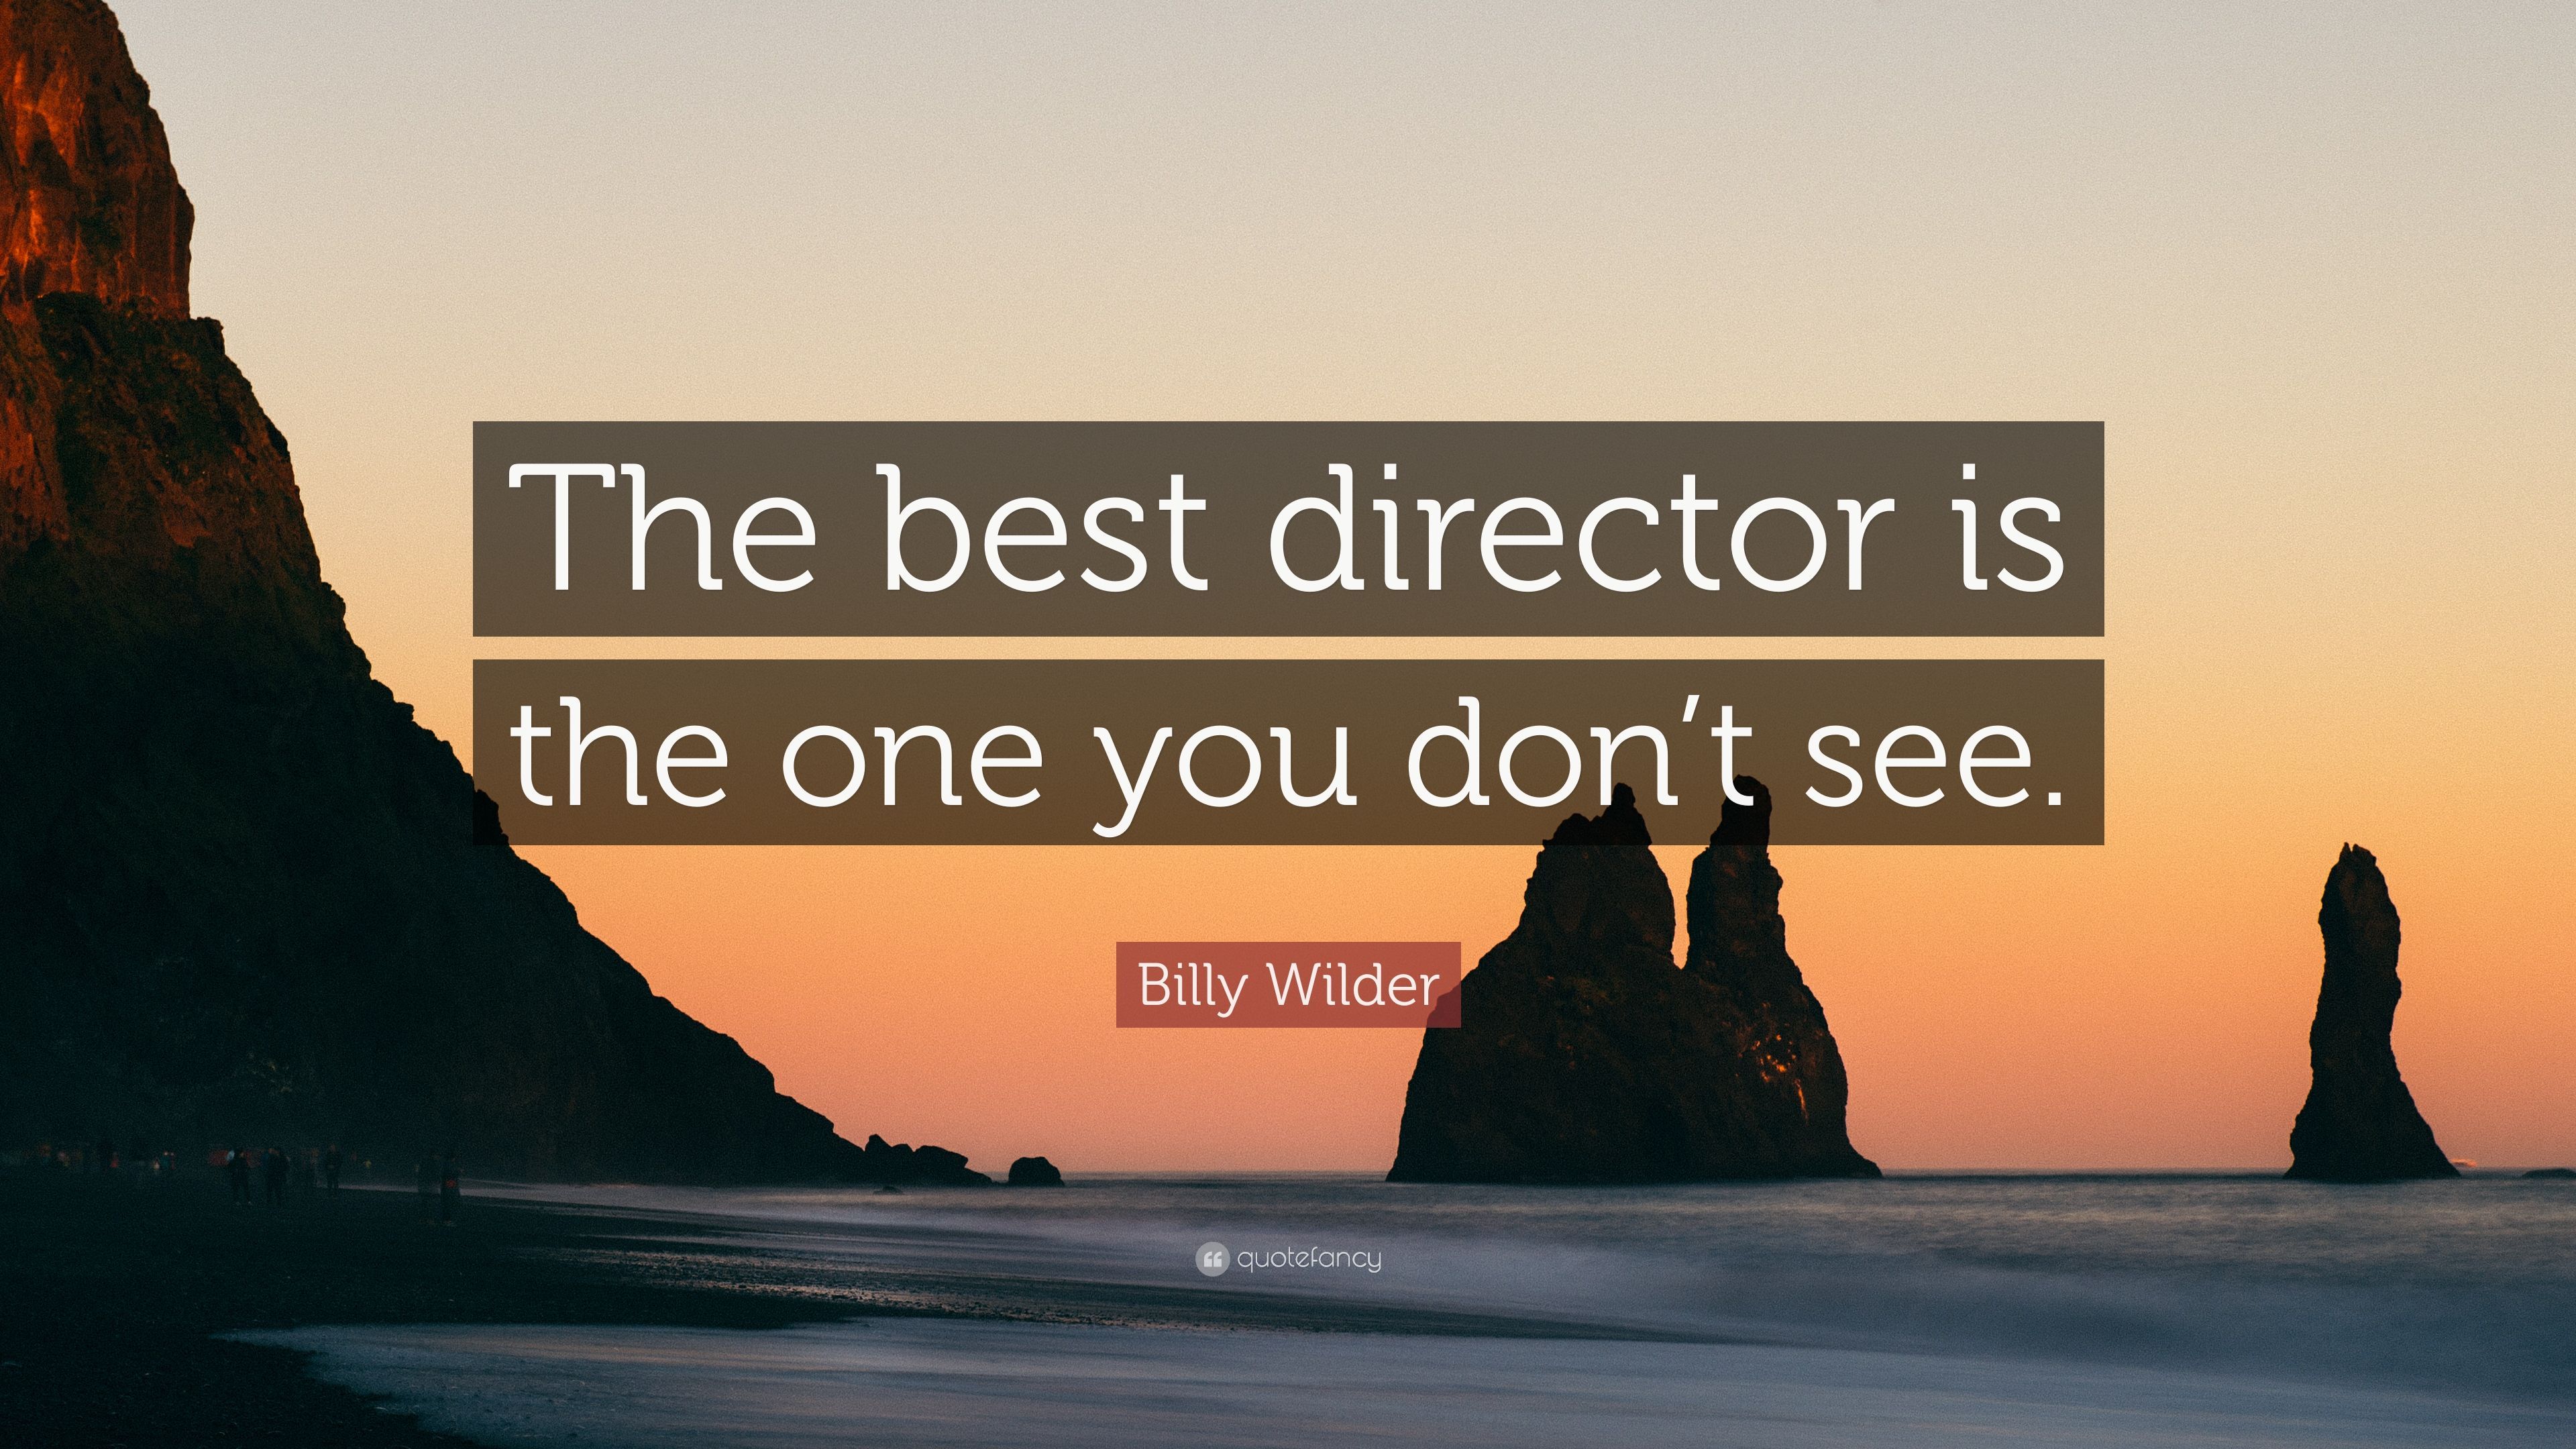 Billy Wilder Quote: “The best director is the one you don't see